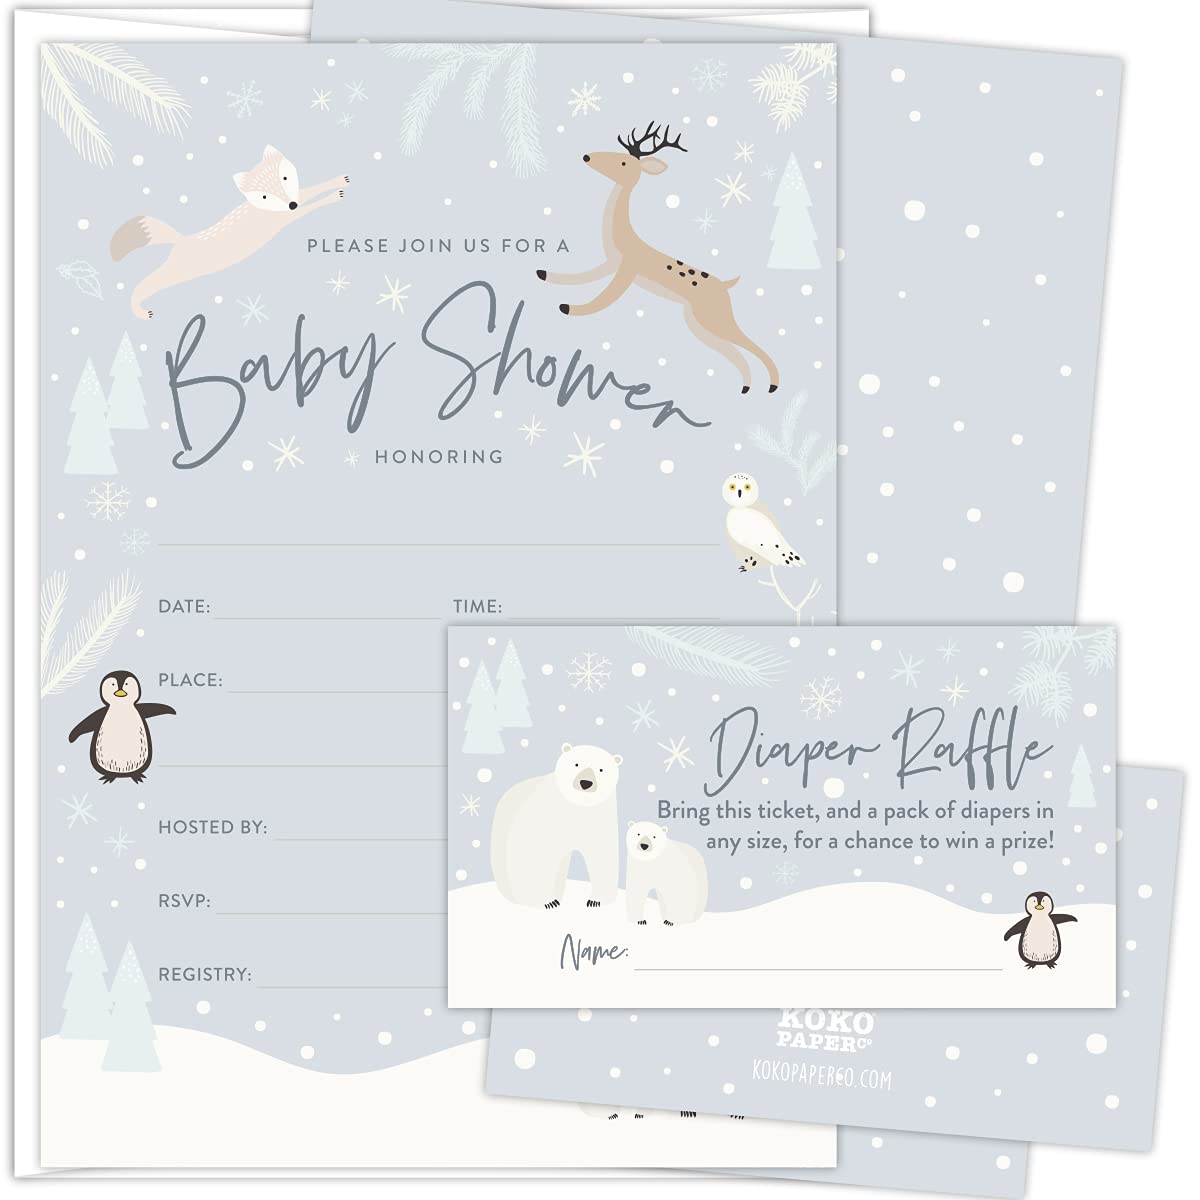 Koko Paper Co Snowy Winter Wonderland Baby Shower Invitations and Diaper Raffle Tickets | 25 Fill-in Invitations, 25 Bright White Envelopes and 25 Diaper Raffle Tickets | 75 pcs Total | Printed on Heavy Card Stock.